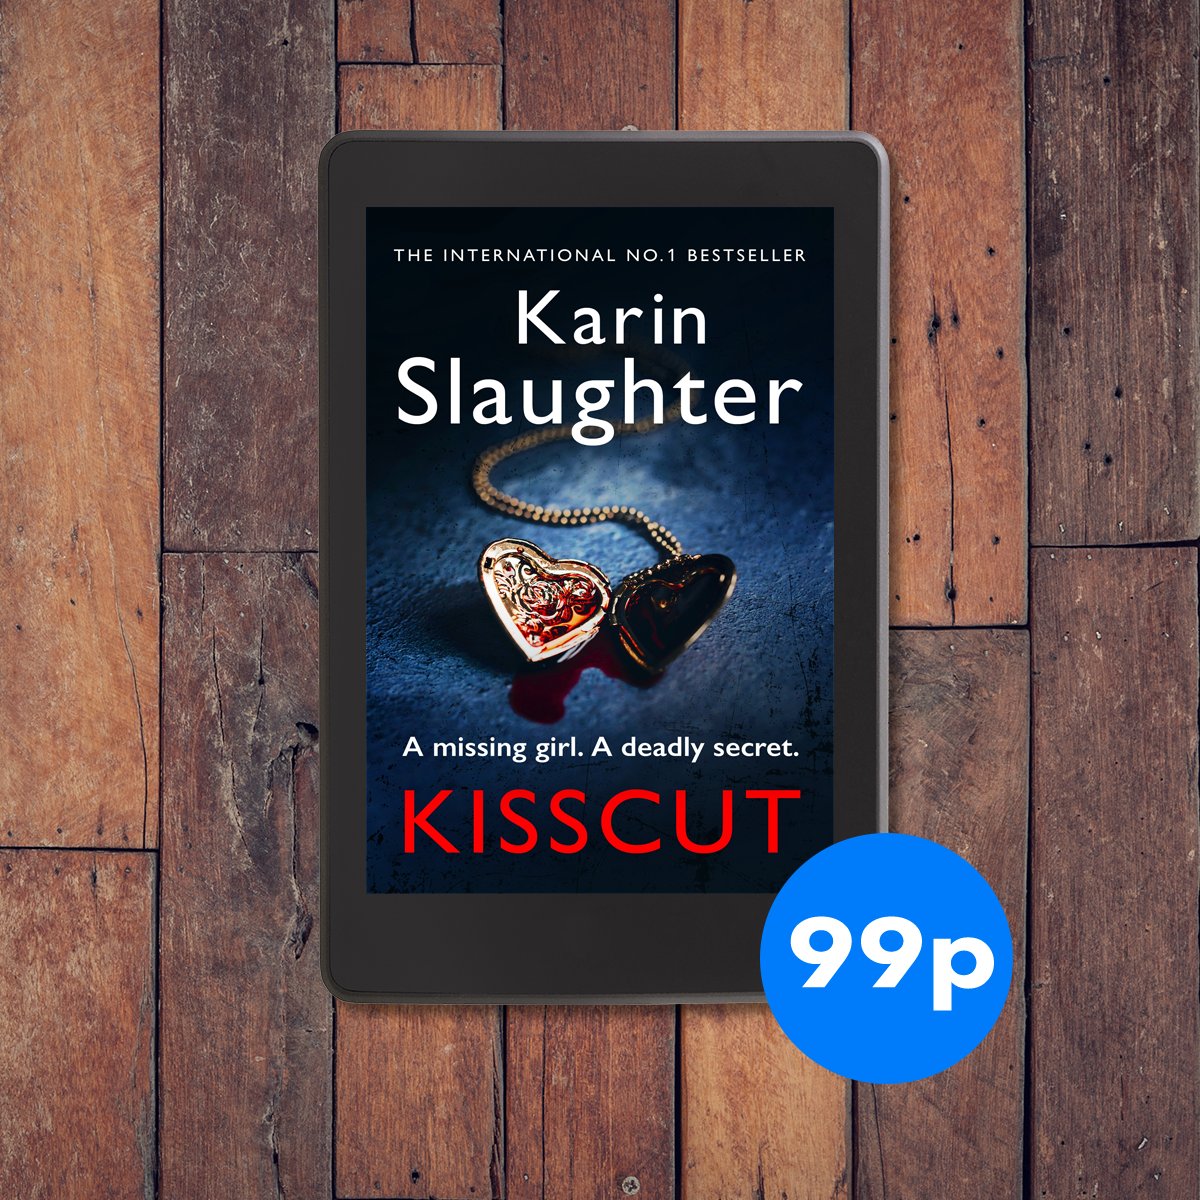 Most teenage secrets are harmless, but this one could have deadly consequences... This week's eBook deal is #Kisscut by @SlaughterKarin! Get yourself a copy for just 99p: amazon.co.uk/Kisscut-Grant-… #AffiliateLink